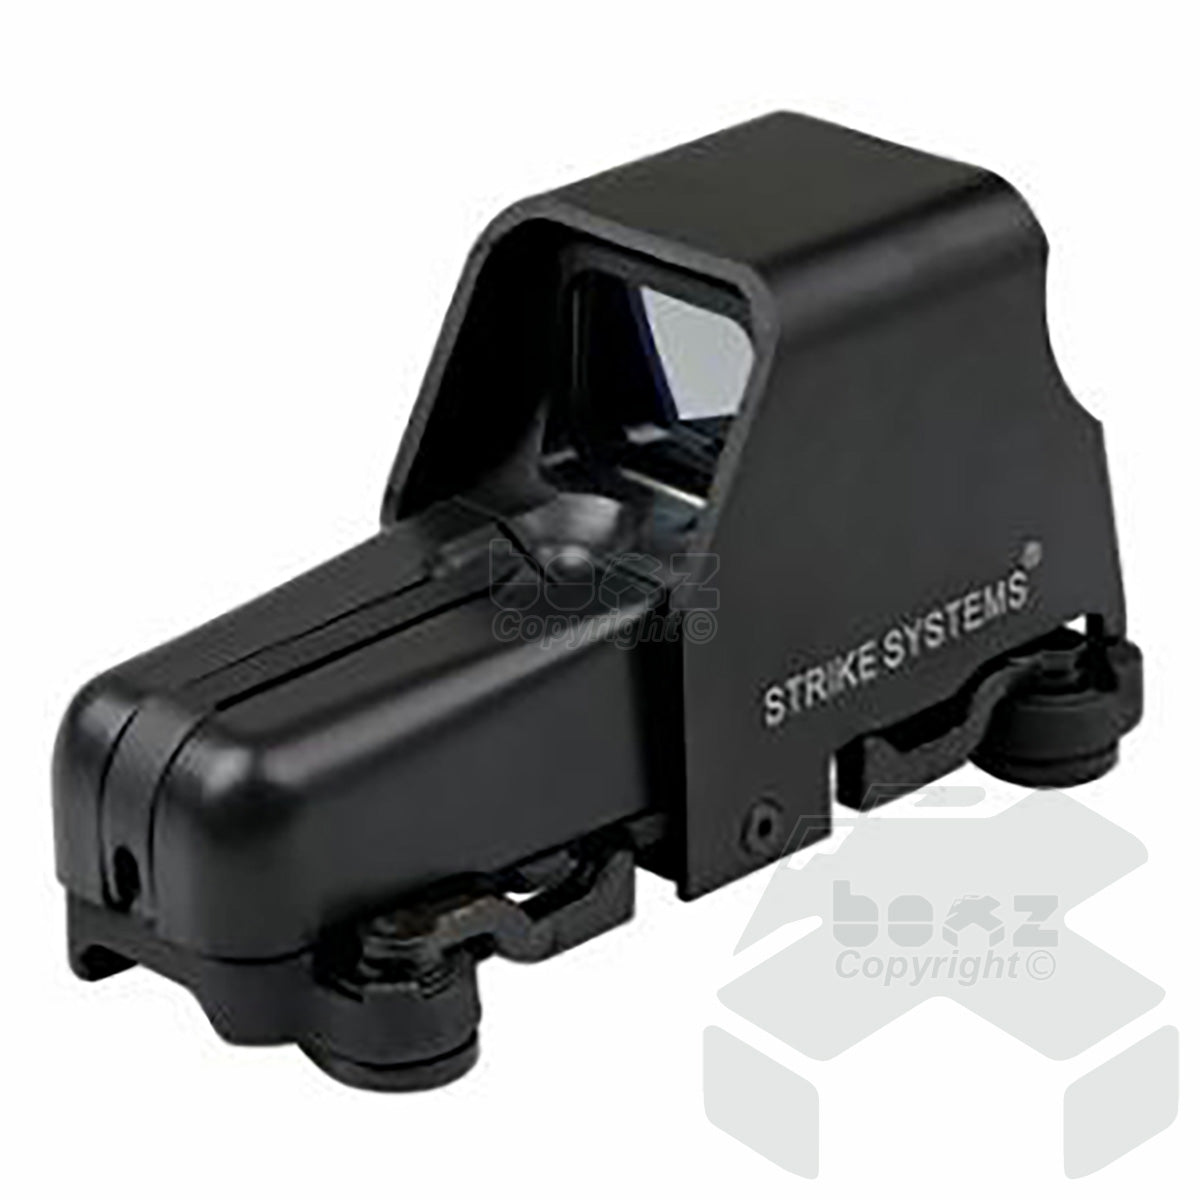 Strike Systems Advanced 553 Red/Green Holographic sight